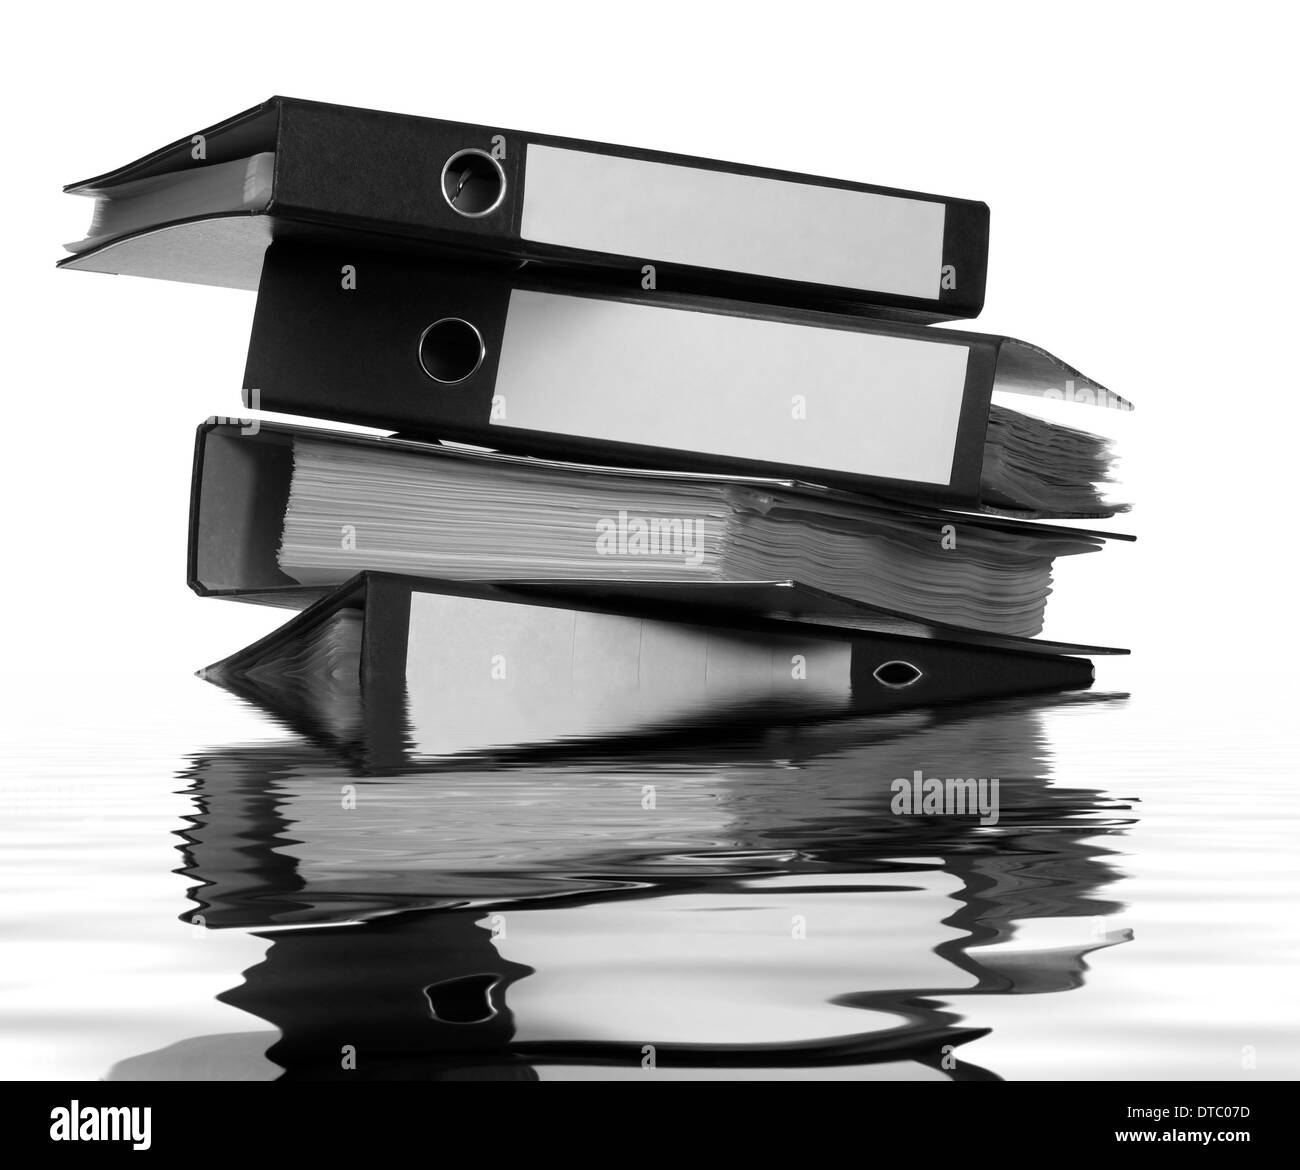 stack of partly sunken folders on reflective water surface Stock Photo